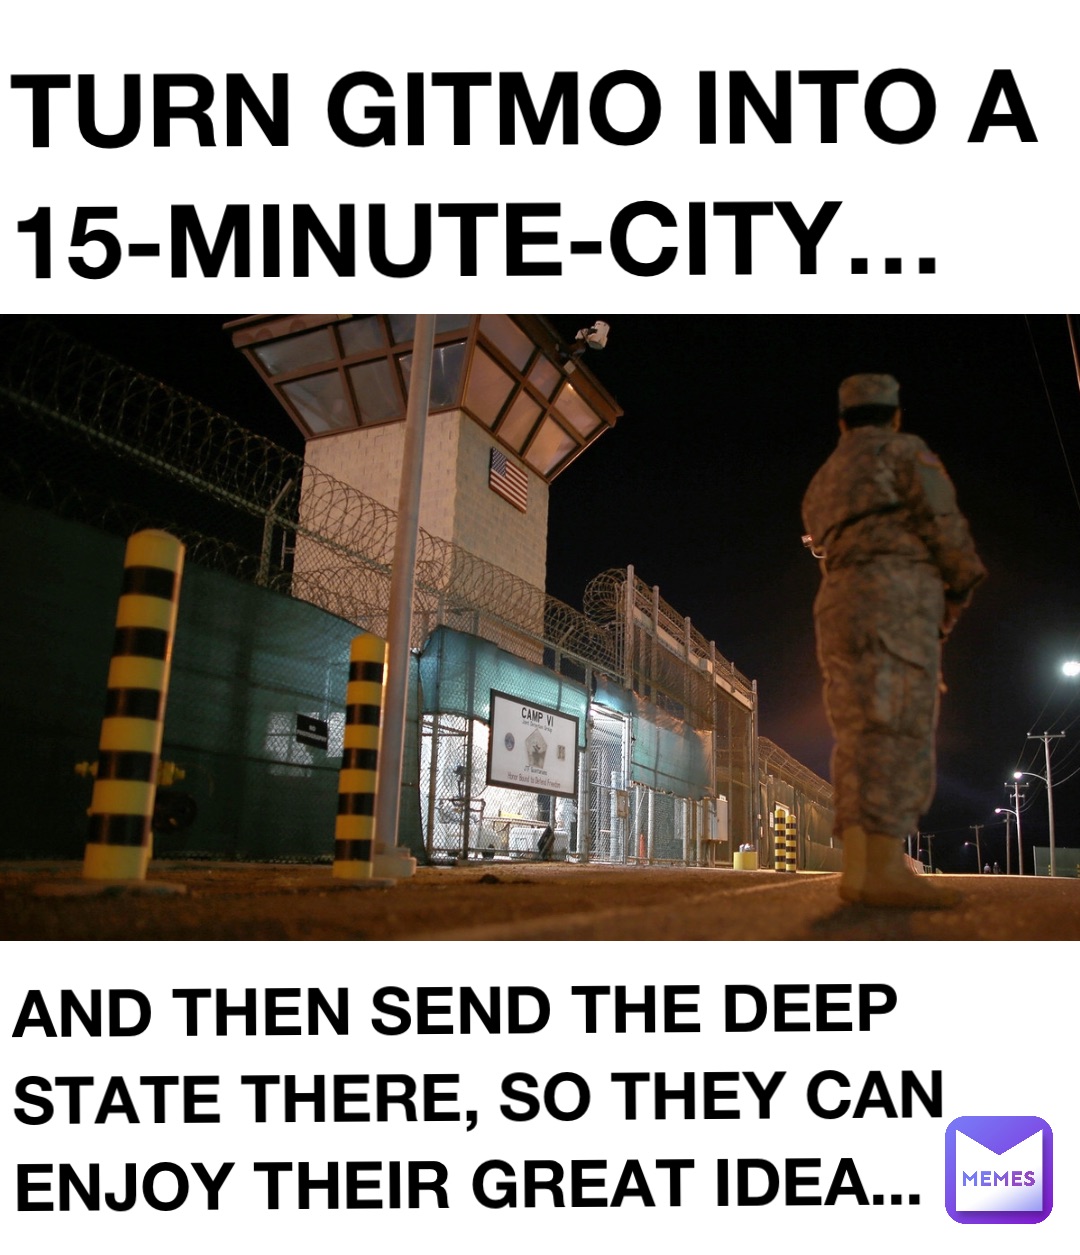 TURN GITMO INTO A 15-MINUTE-CITY… AND THEN SEND THE DEEP STATE THERE, SO THEY CAN ENJOY THEIR GREAT IDEA...     .